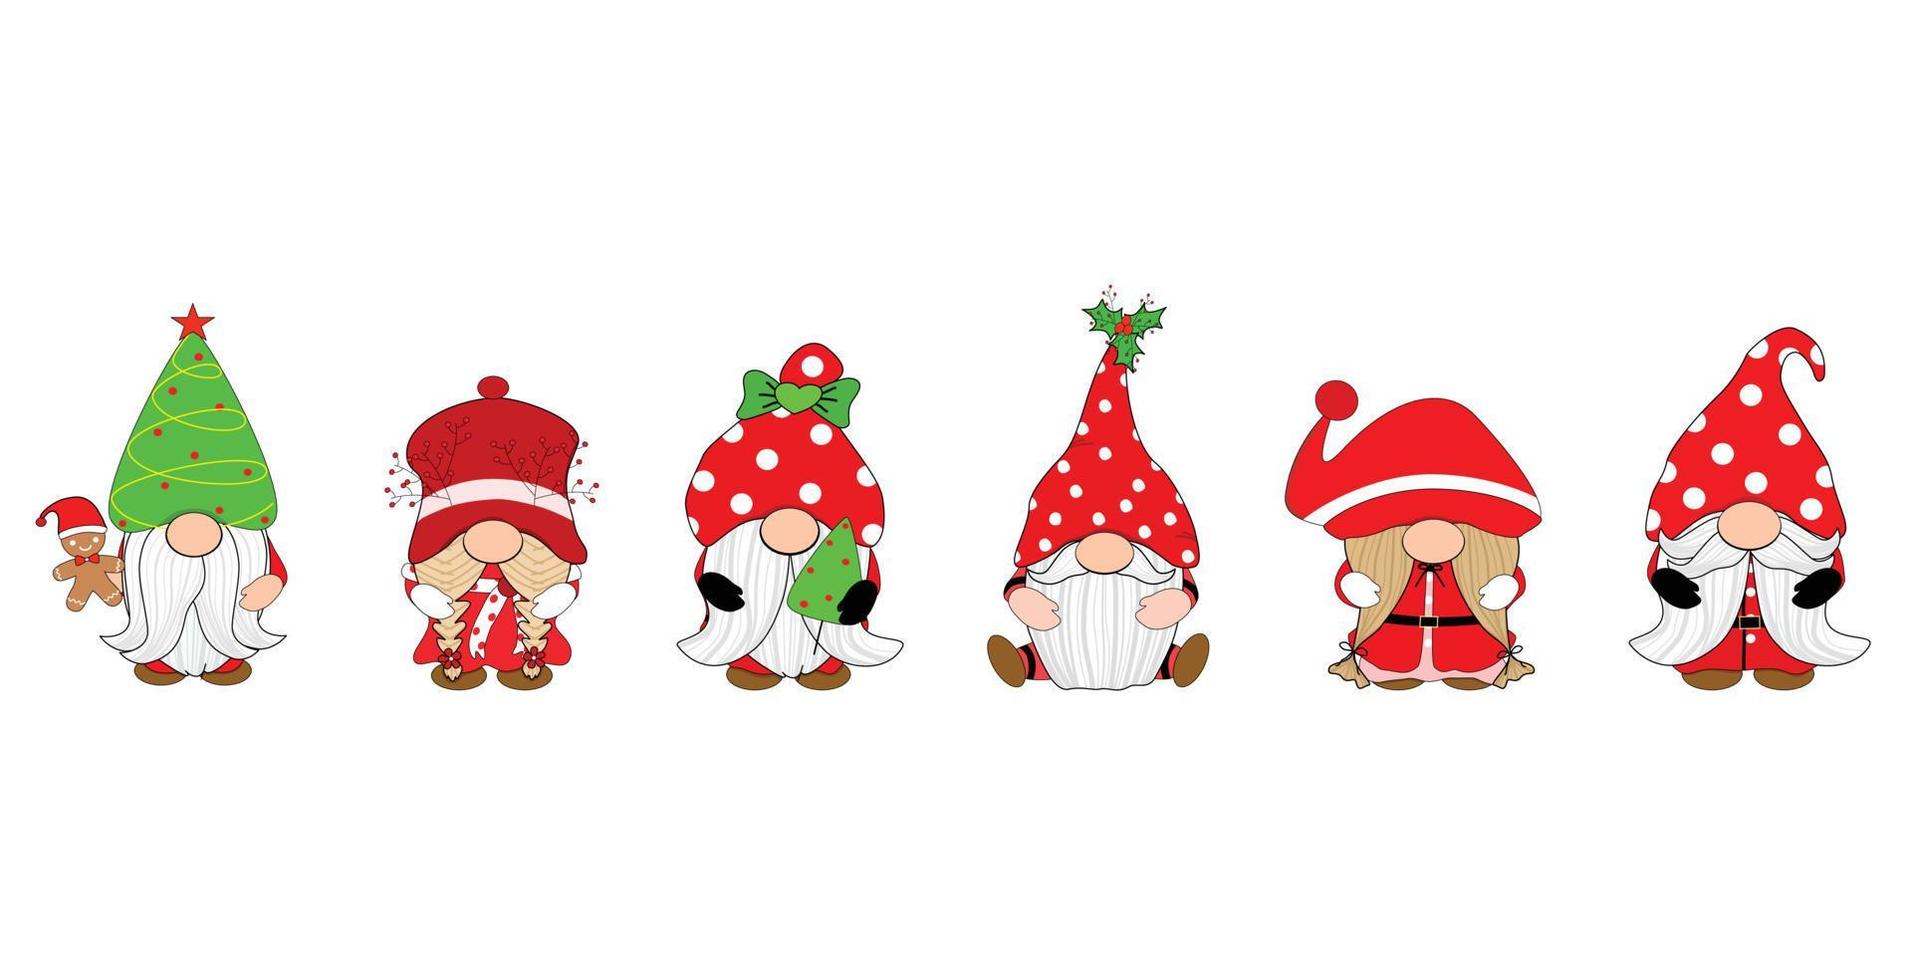 Vector - Set of Santa Claus Gnome. Clip art. Can be use for sticker, print, paper, card. Christmas, Happy New Year, Holiday concept.